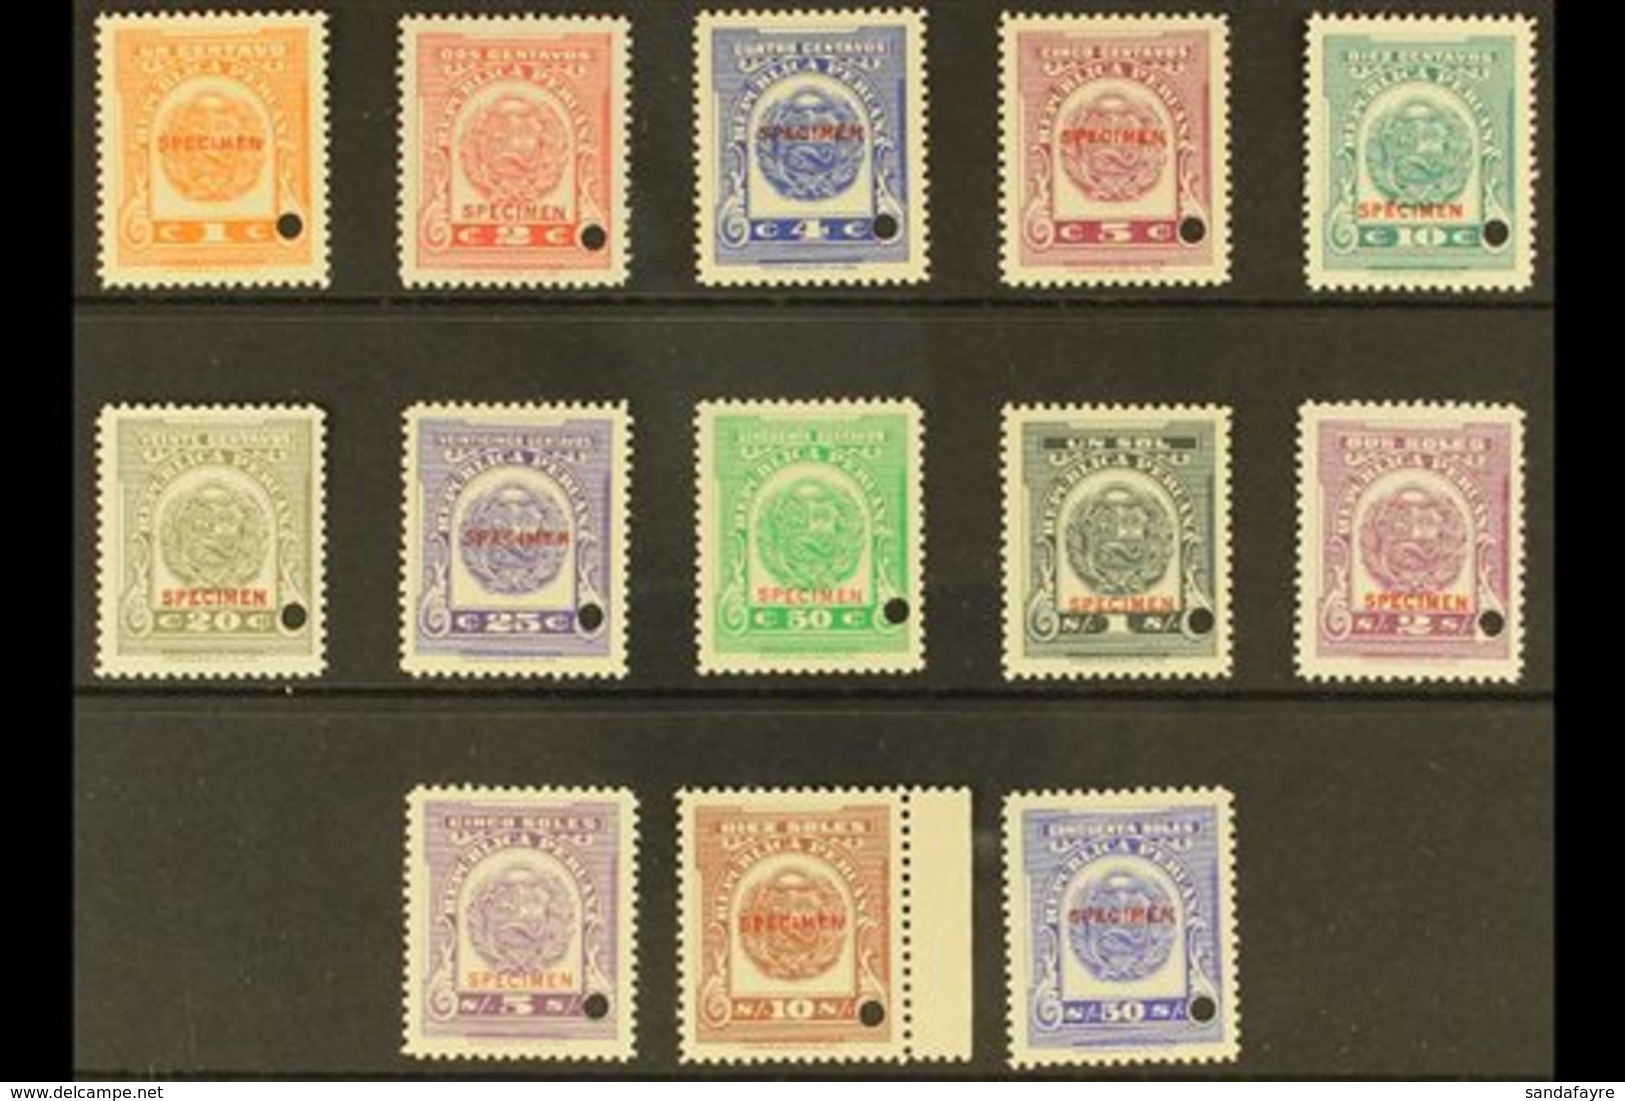 REVENUES DOCUMENT STAMPS 1937 Complete Set With "SPECIMEN" Overprints And Small Security Punch Holes, Never Hinged Mint  - Pérou